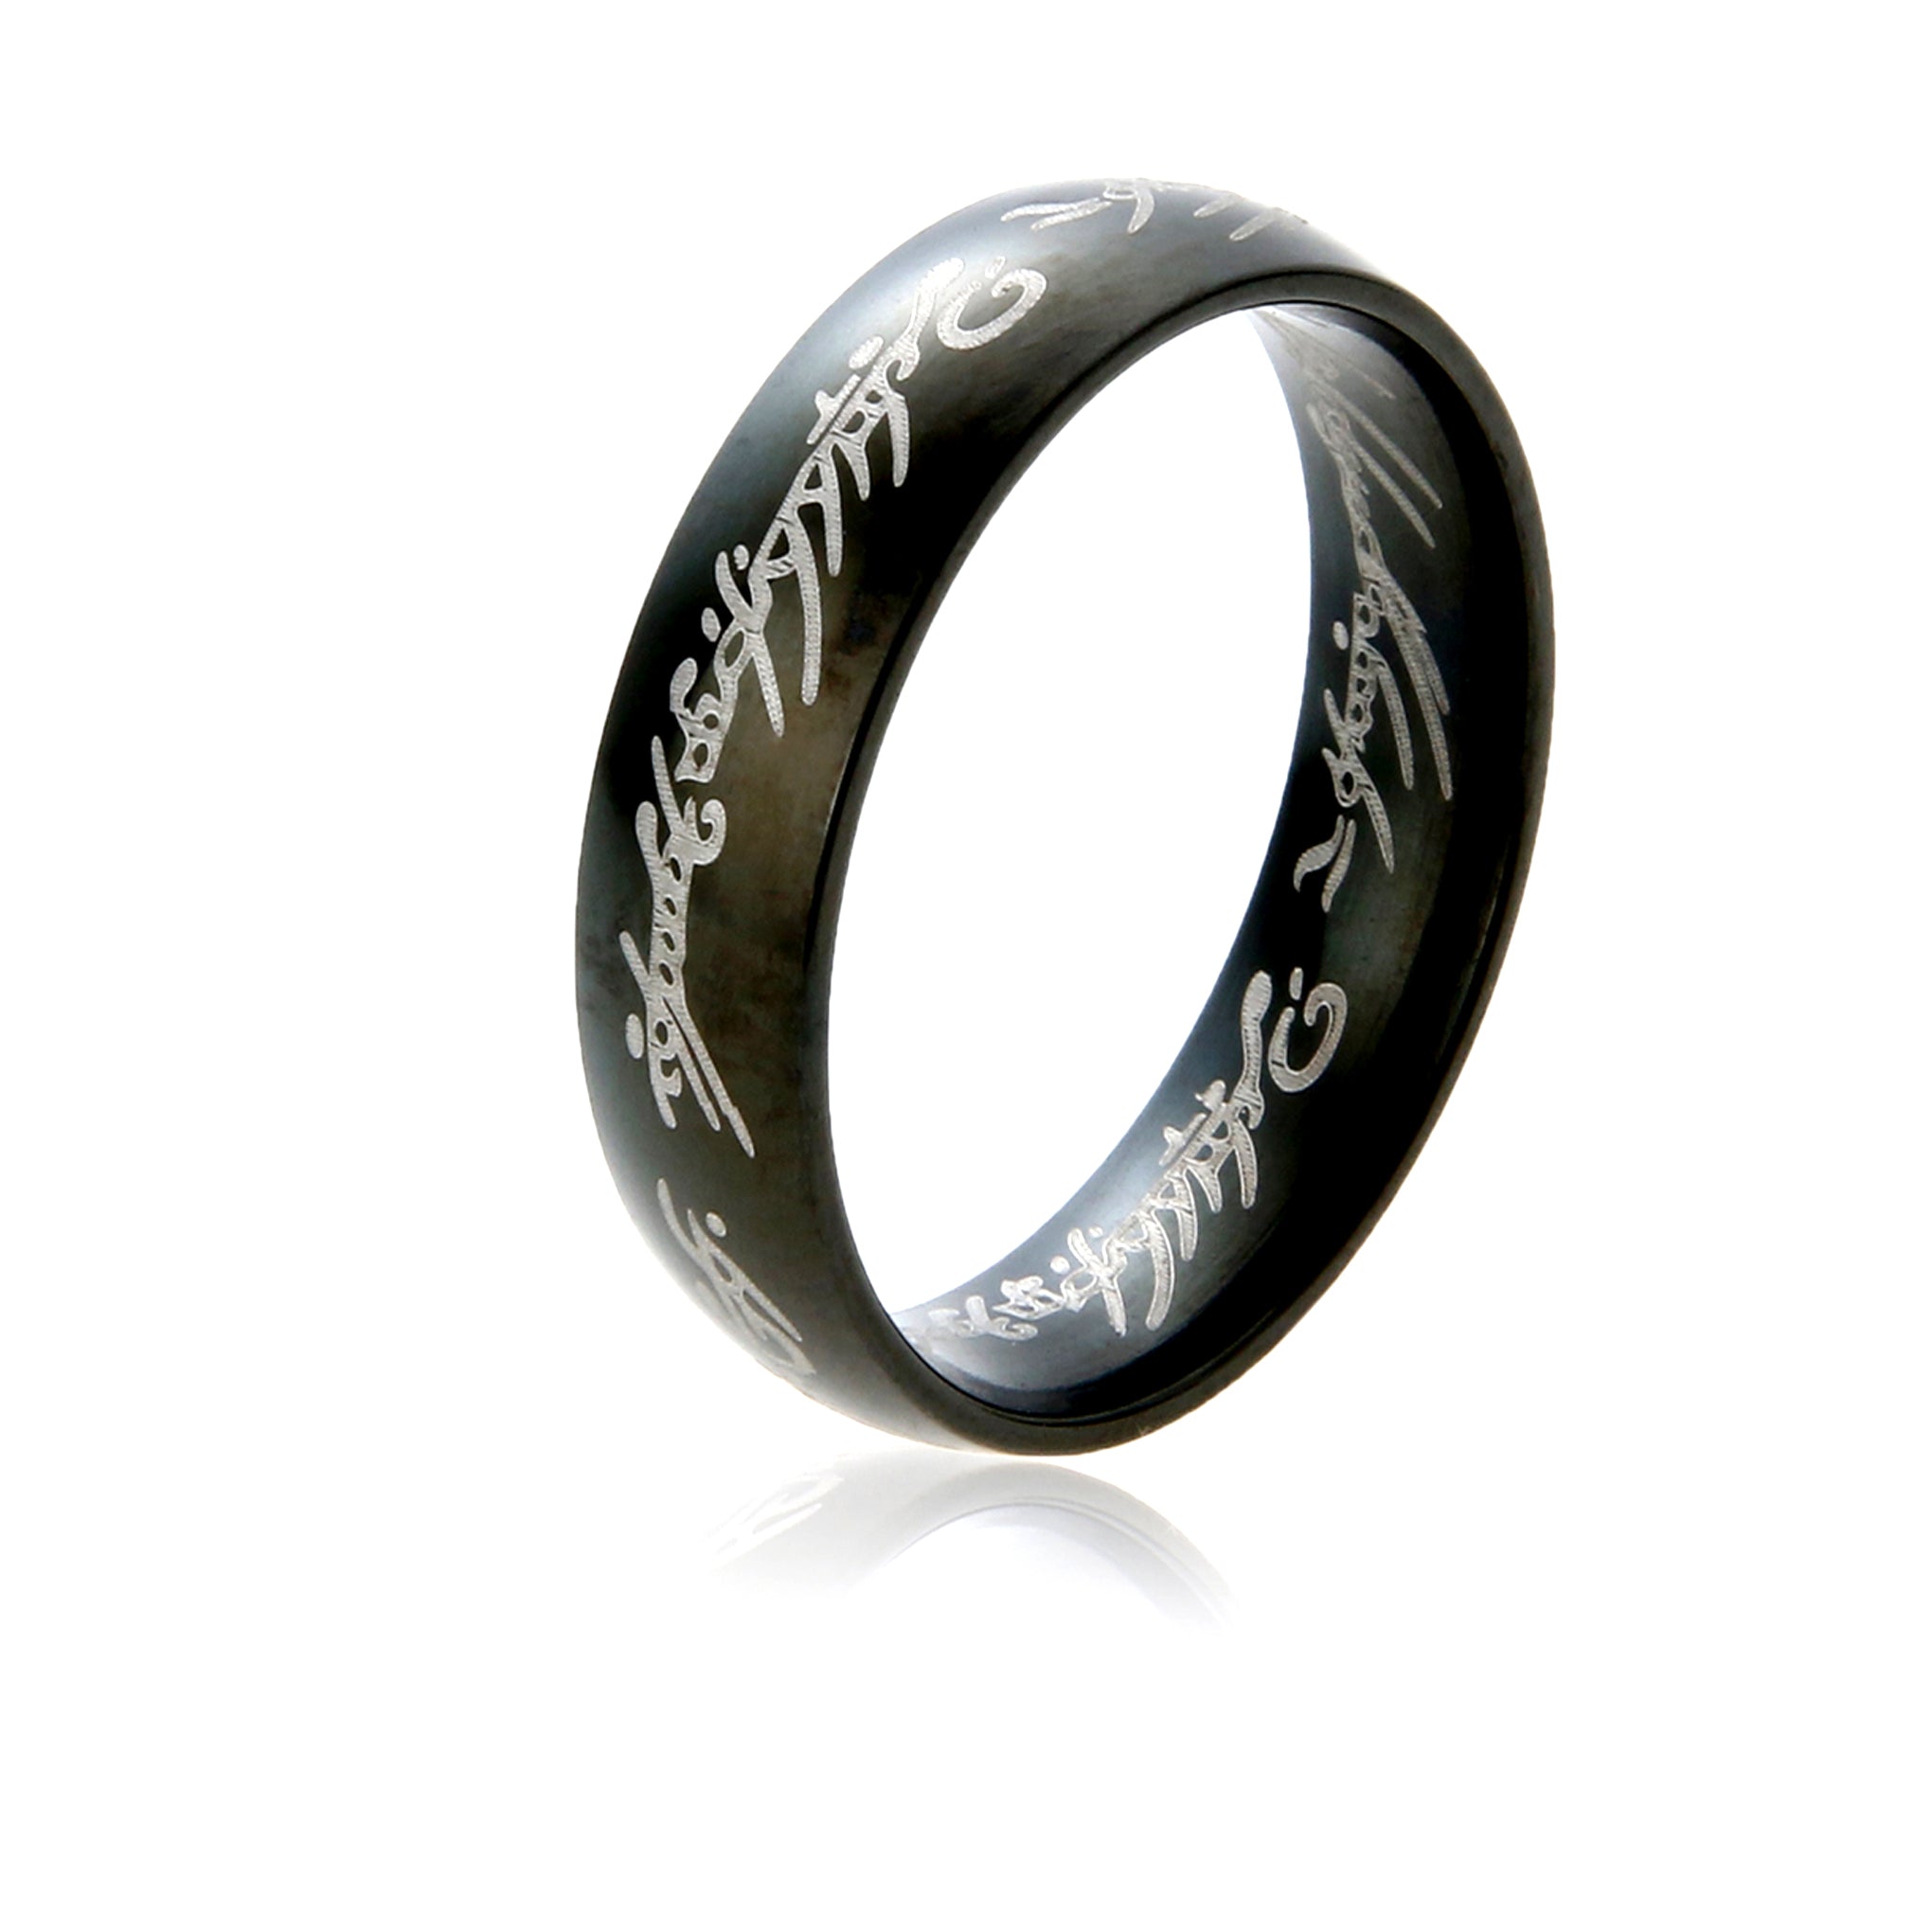 One Ring of Power Wedding Band Stainless Steel Mens Womens Ginger Lyne Collection - Black,11